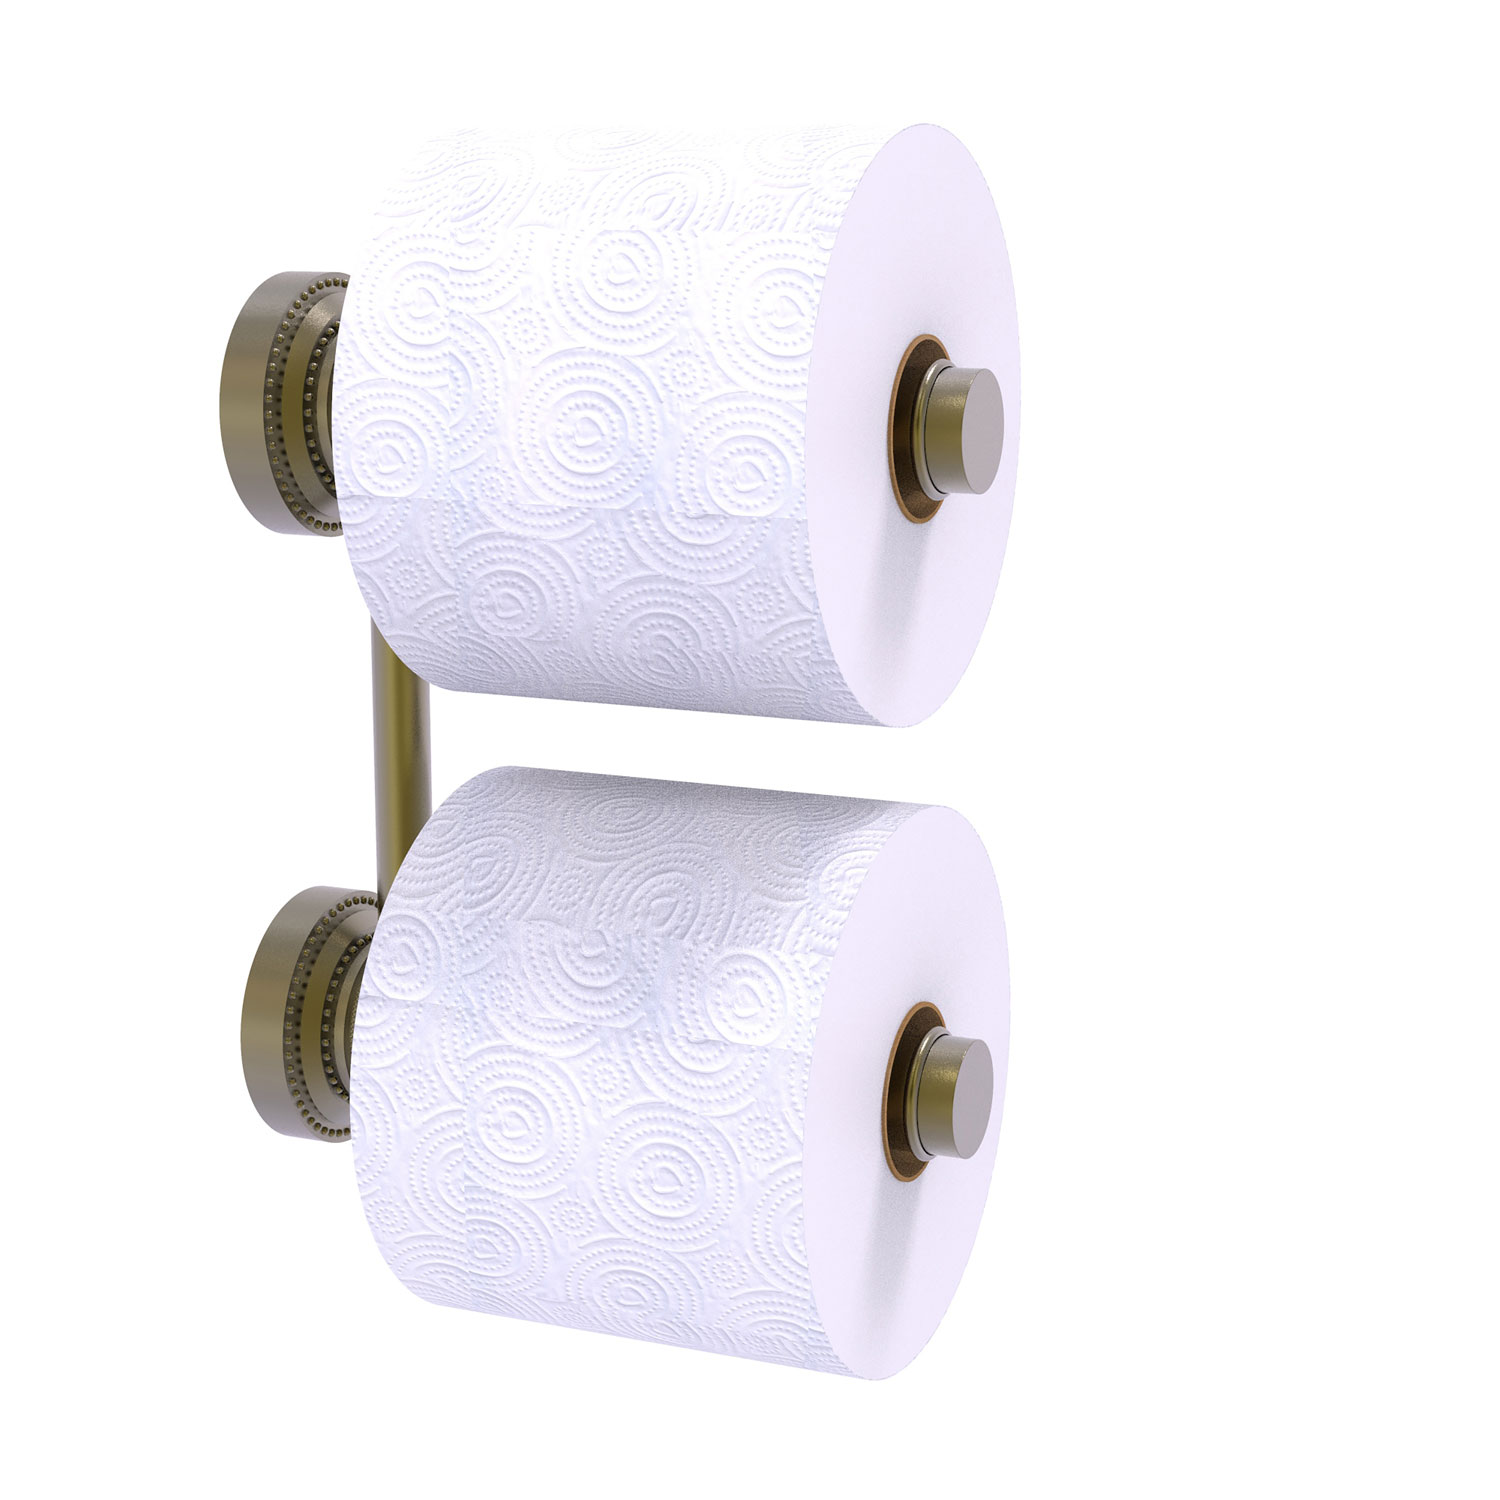 Toilet Paper Holders Category